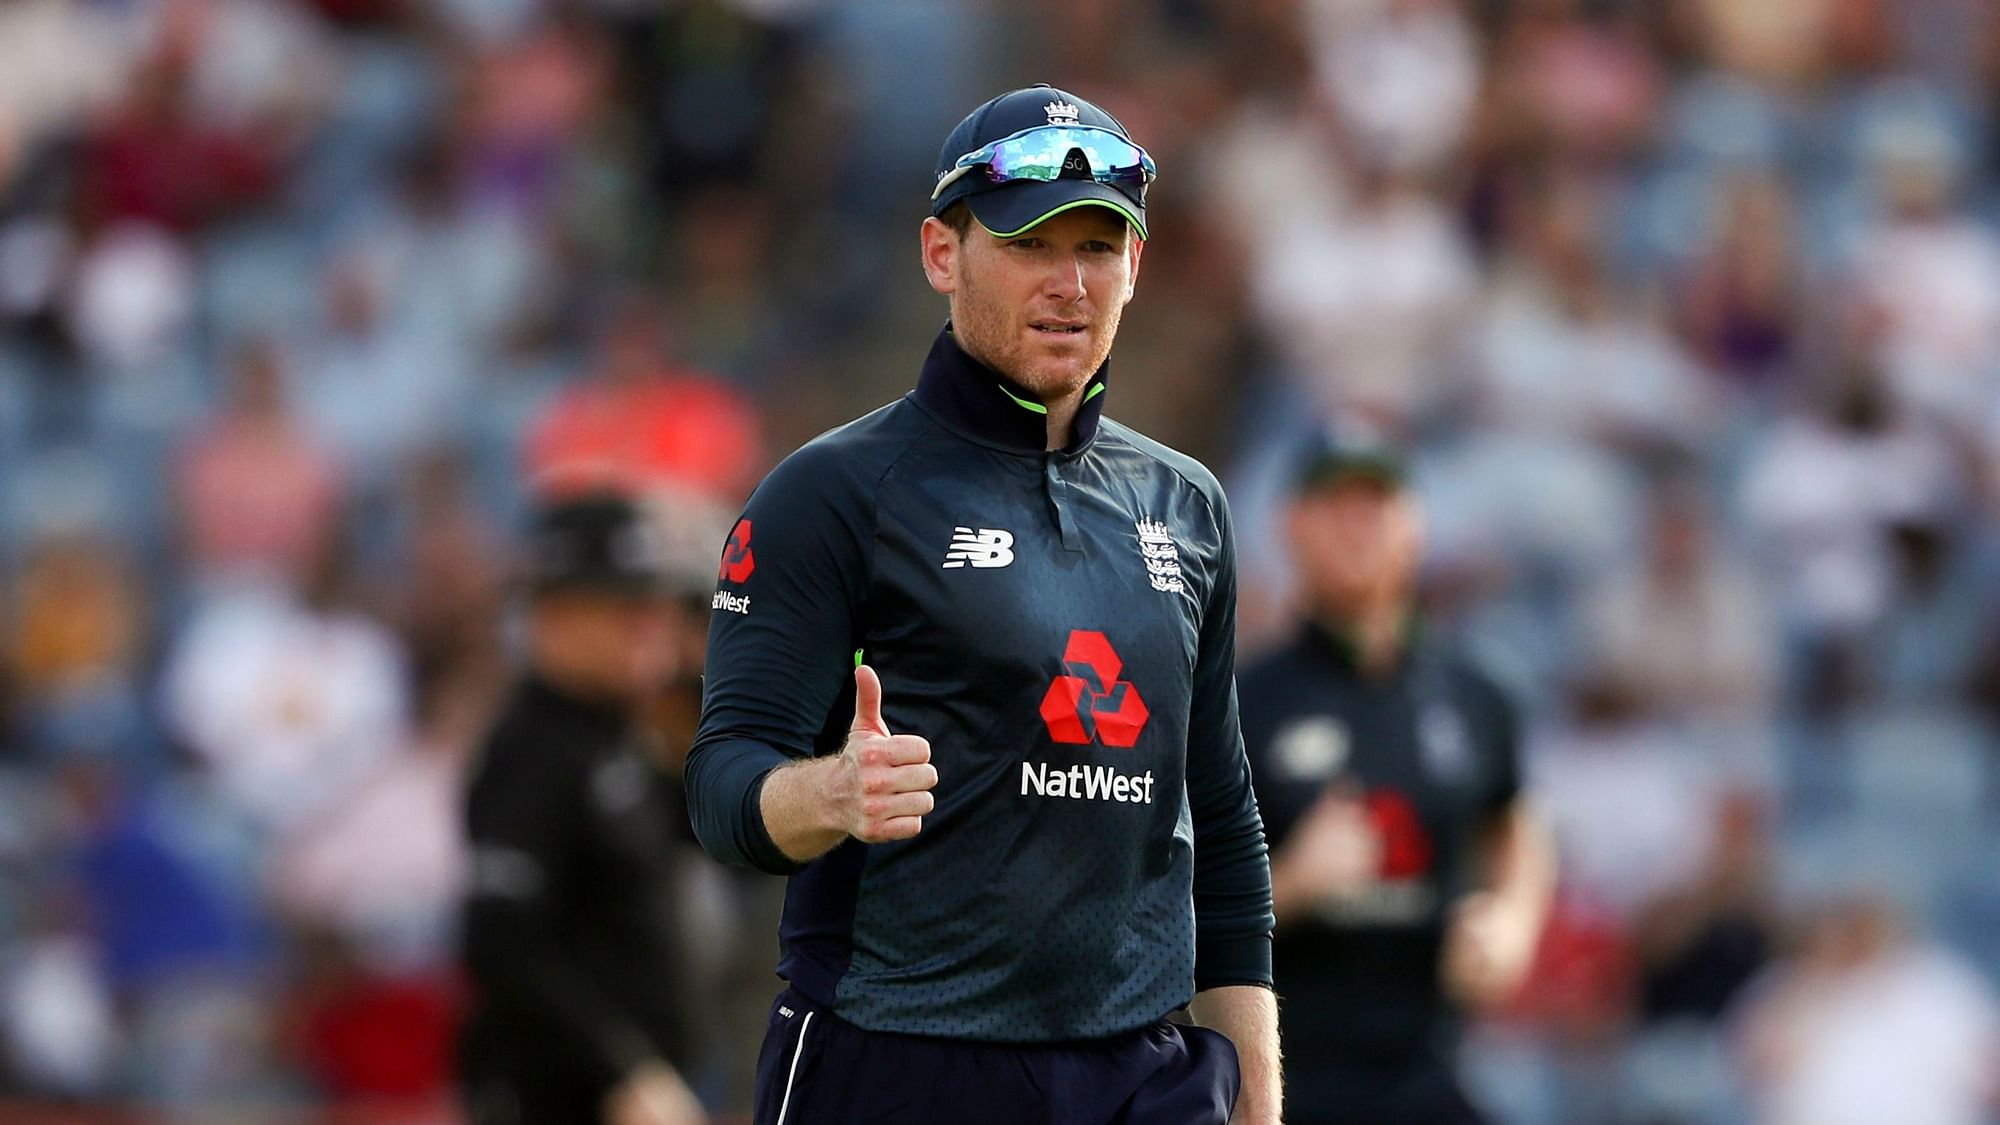 <div class="paragraphs"><p>England's World Cup-winning skipper Eoin Morgan has retired recently owing to fitness issues and poor form.</p></div>